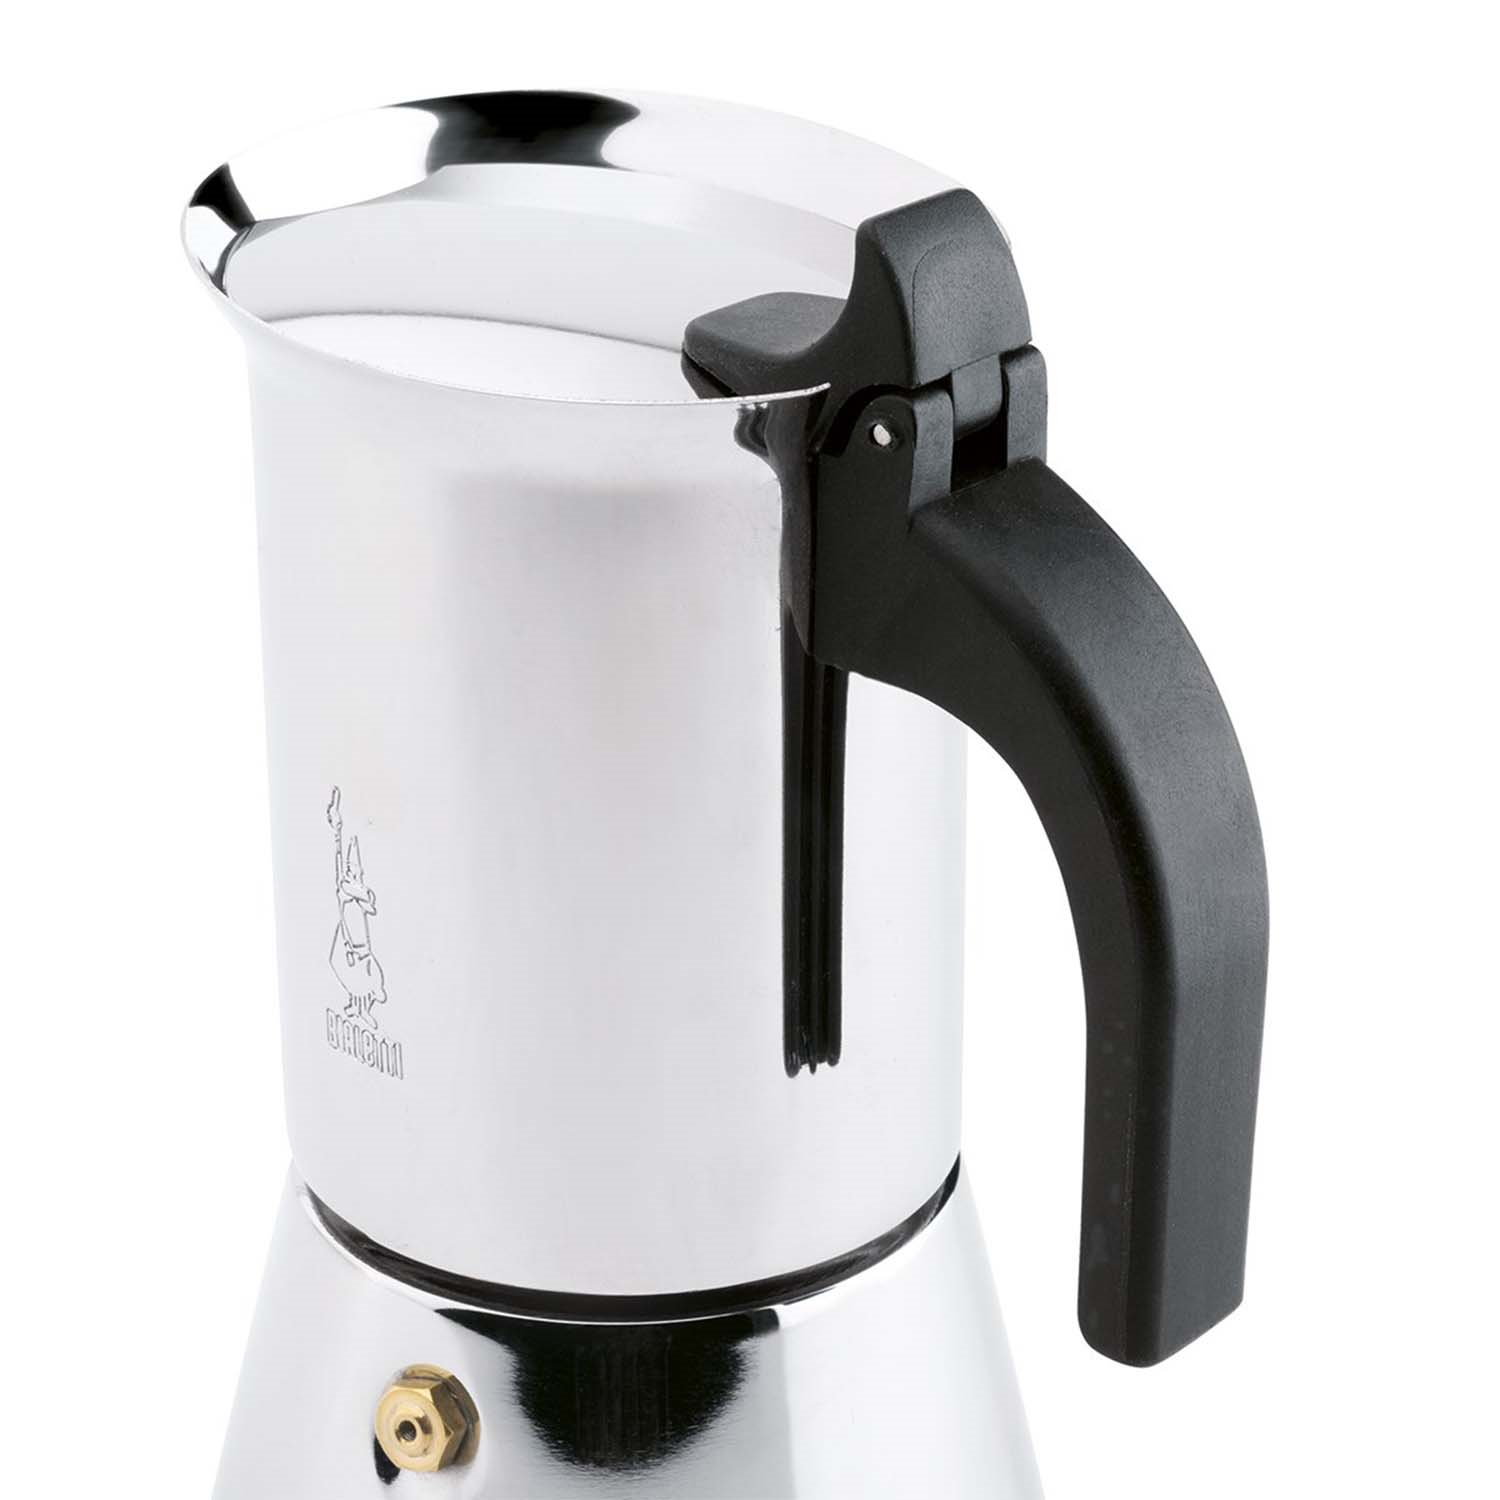 Bialetti 10 Cup Shop, 51% OFF | empow